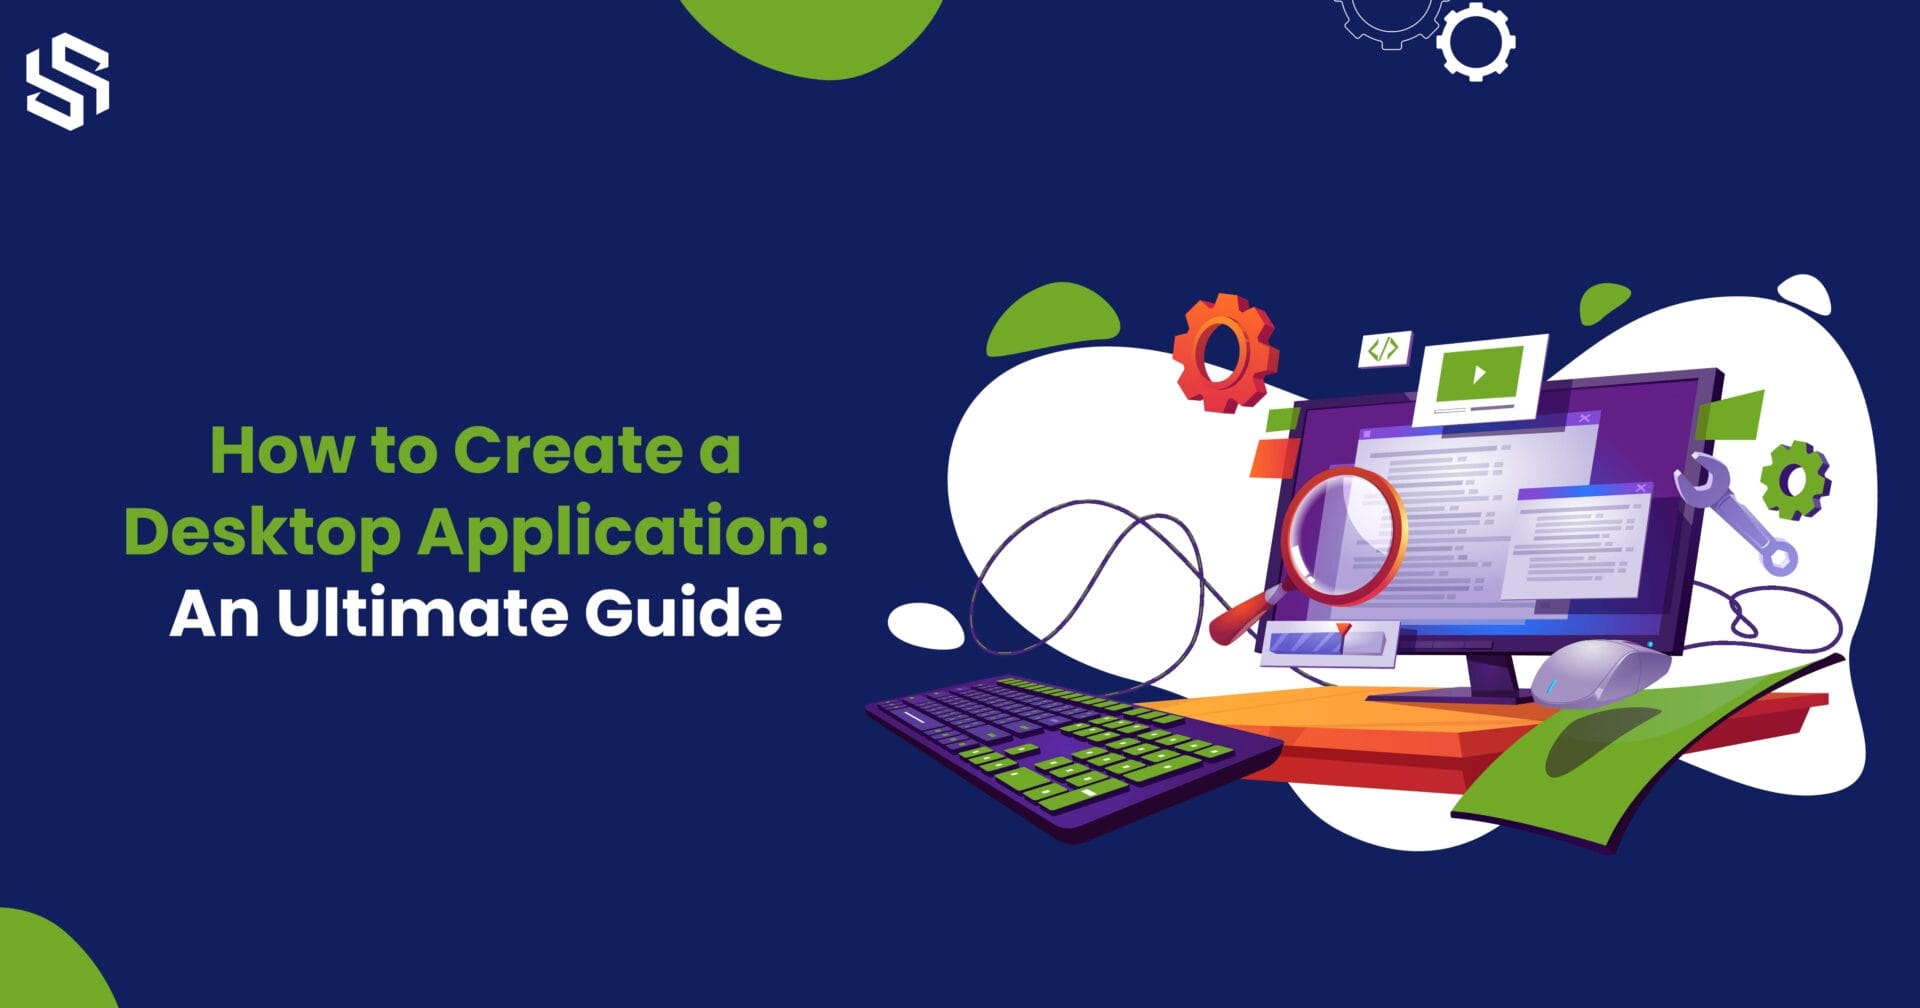 How to Create a Desktop Application - An Ultimate Guide